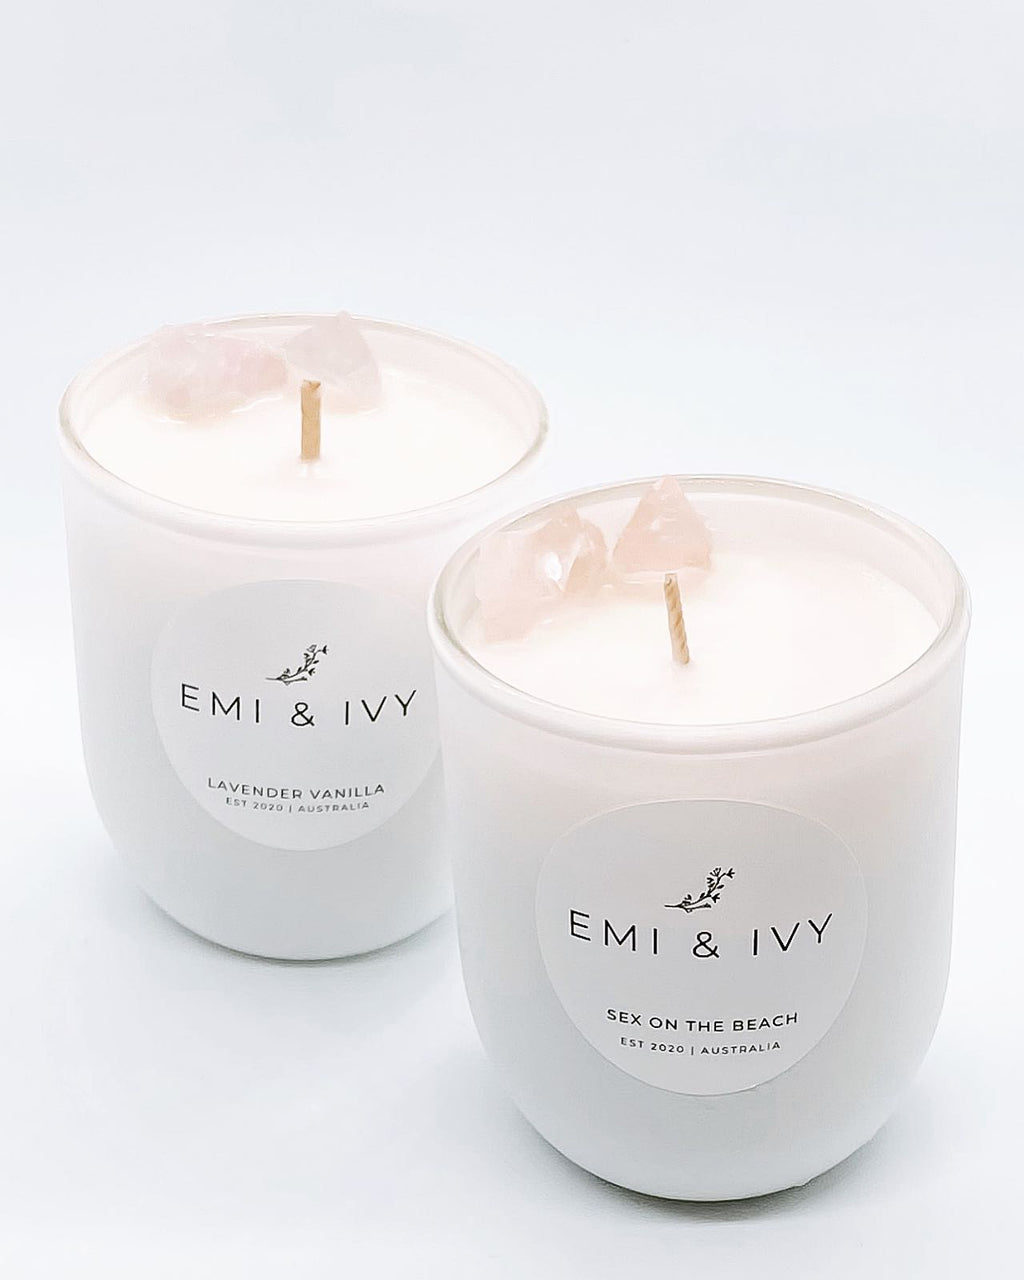 Emi & Ivy hand poured soy candle